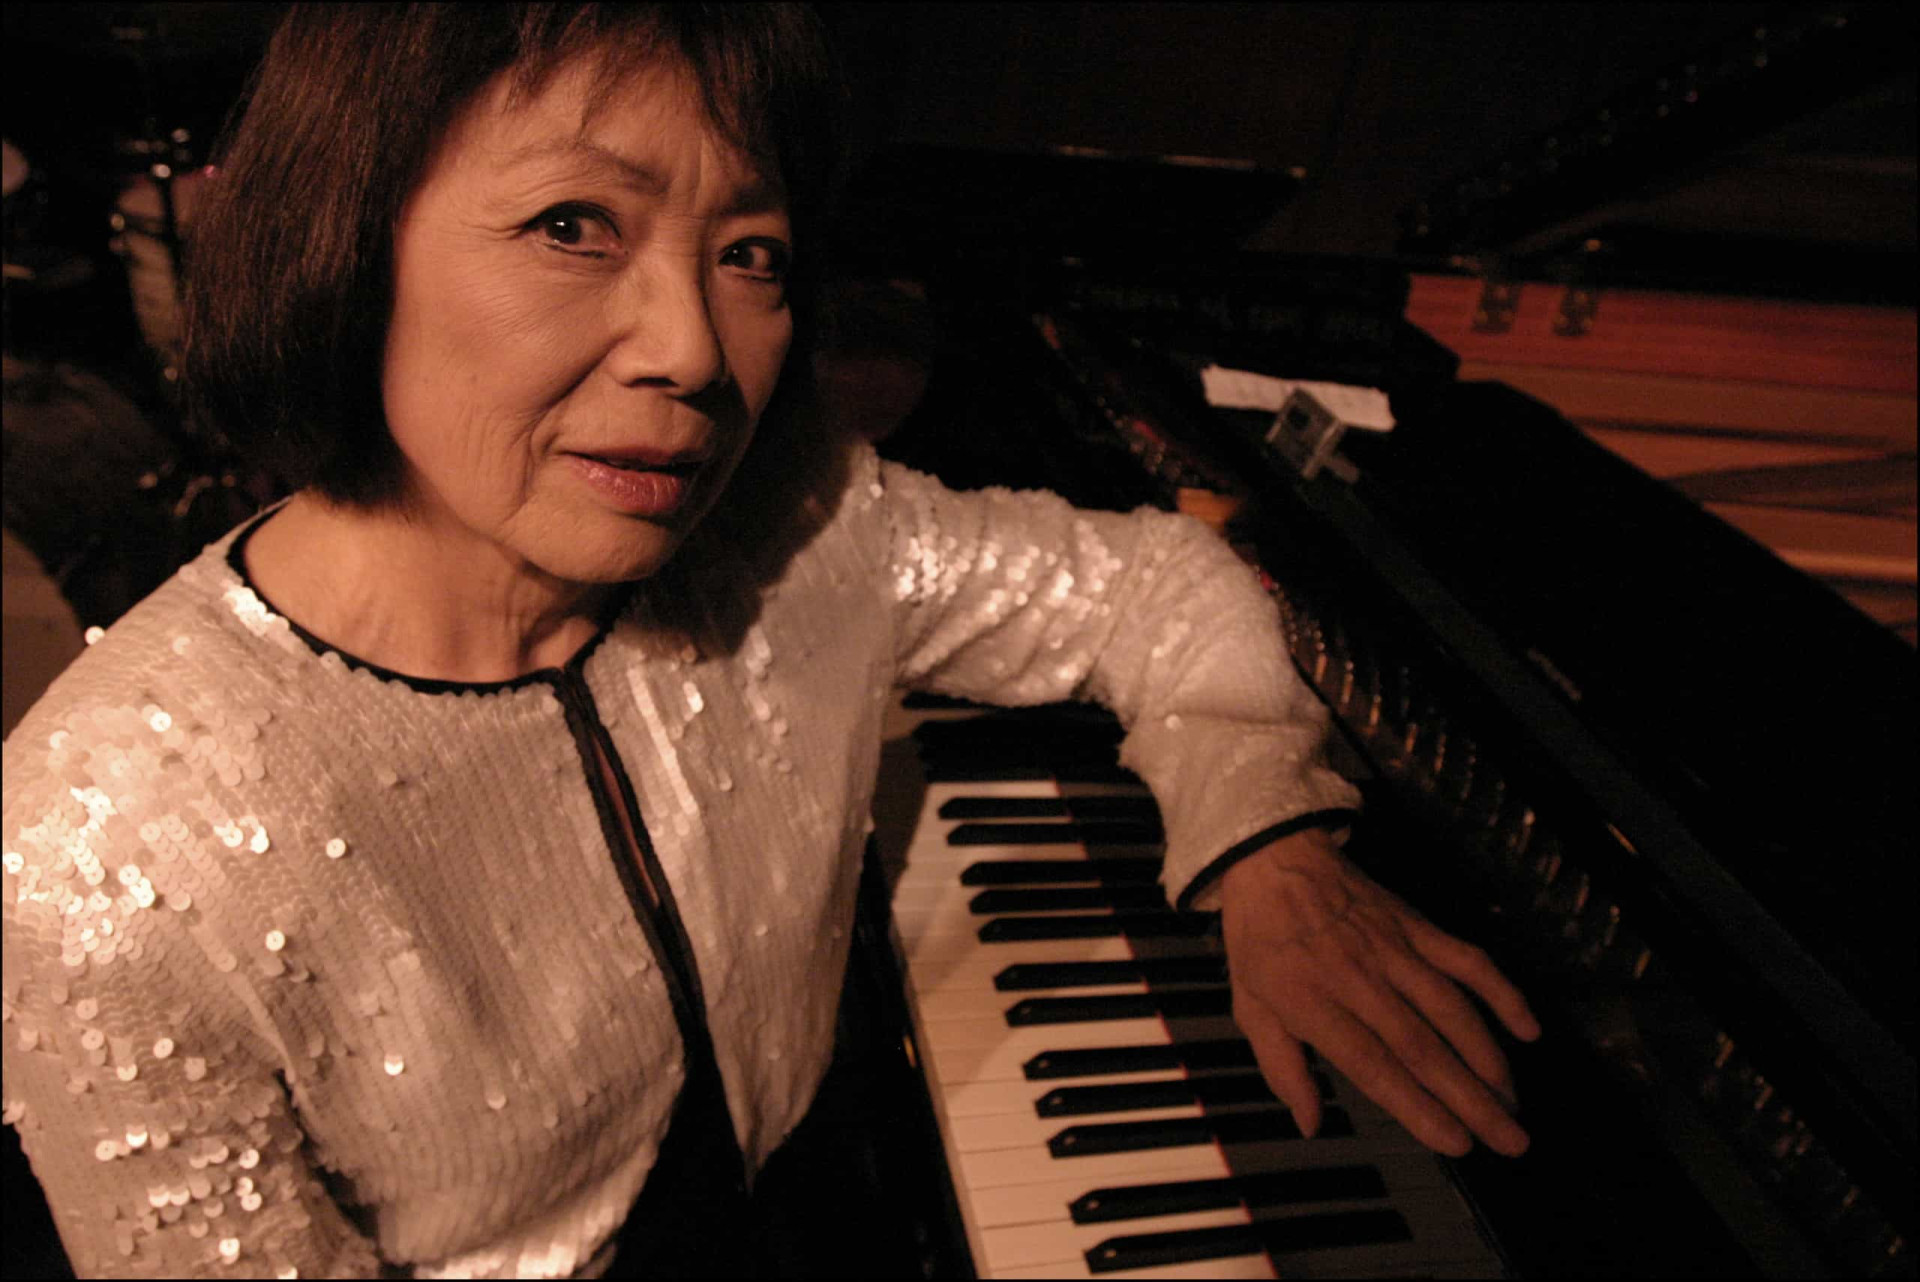 <p>Japanese-American pianist and composer Toshiko Akiyoshi is a fascinating figure in the world of jazz. Her distinct style wonderfully blends Japanese instruments and traditions with the hard-bop sounds of the '50s.</p><p>You may also like:<a href="https://www.starsinsider.com/n/302805?utm_source=msn.com&utm_medium=display&utm_campaign=referral_description&utm_content=507986v1en-sg"> Scenic train journeys to take during winter</a></p>